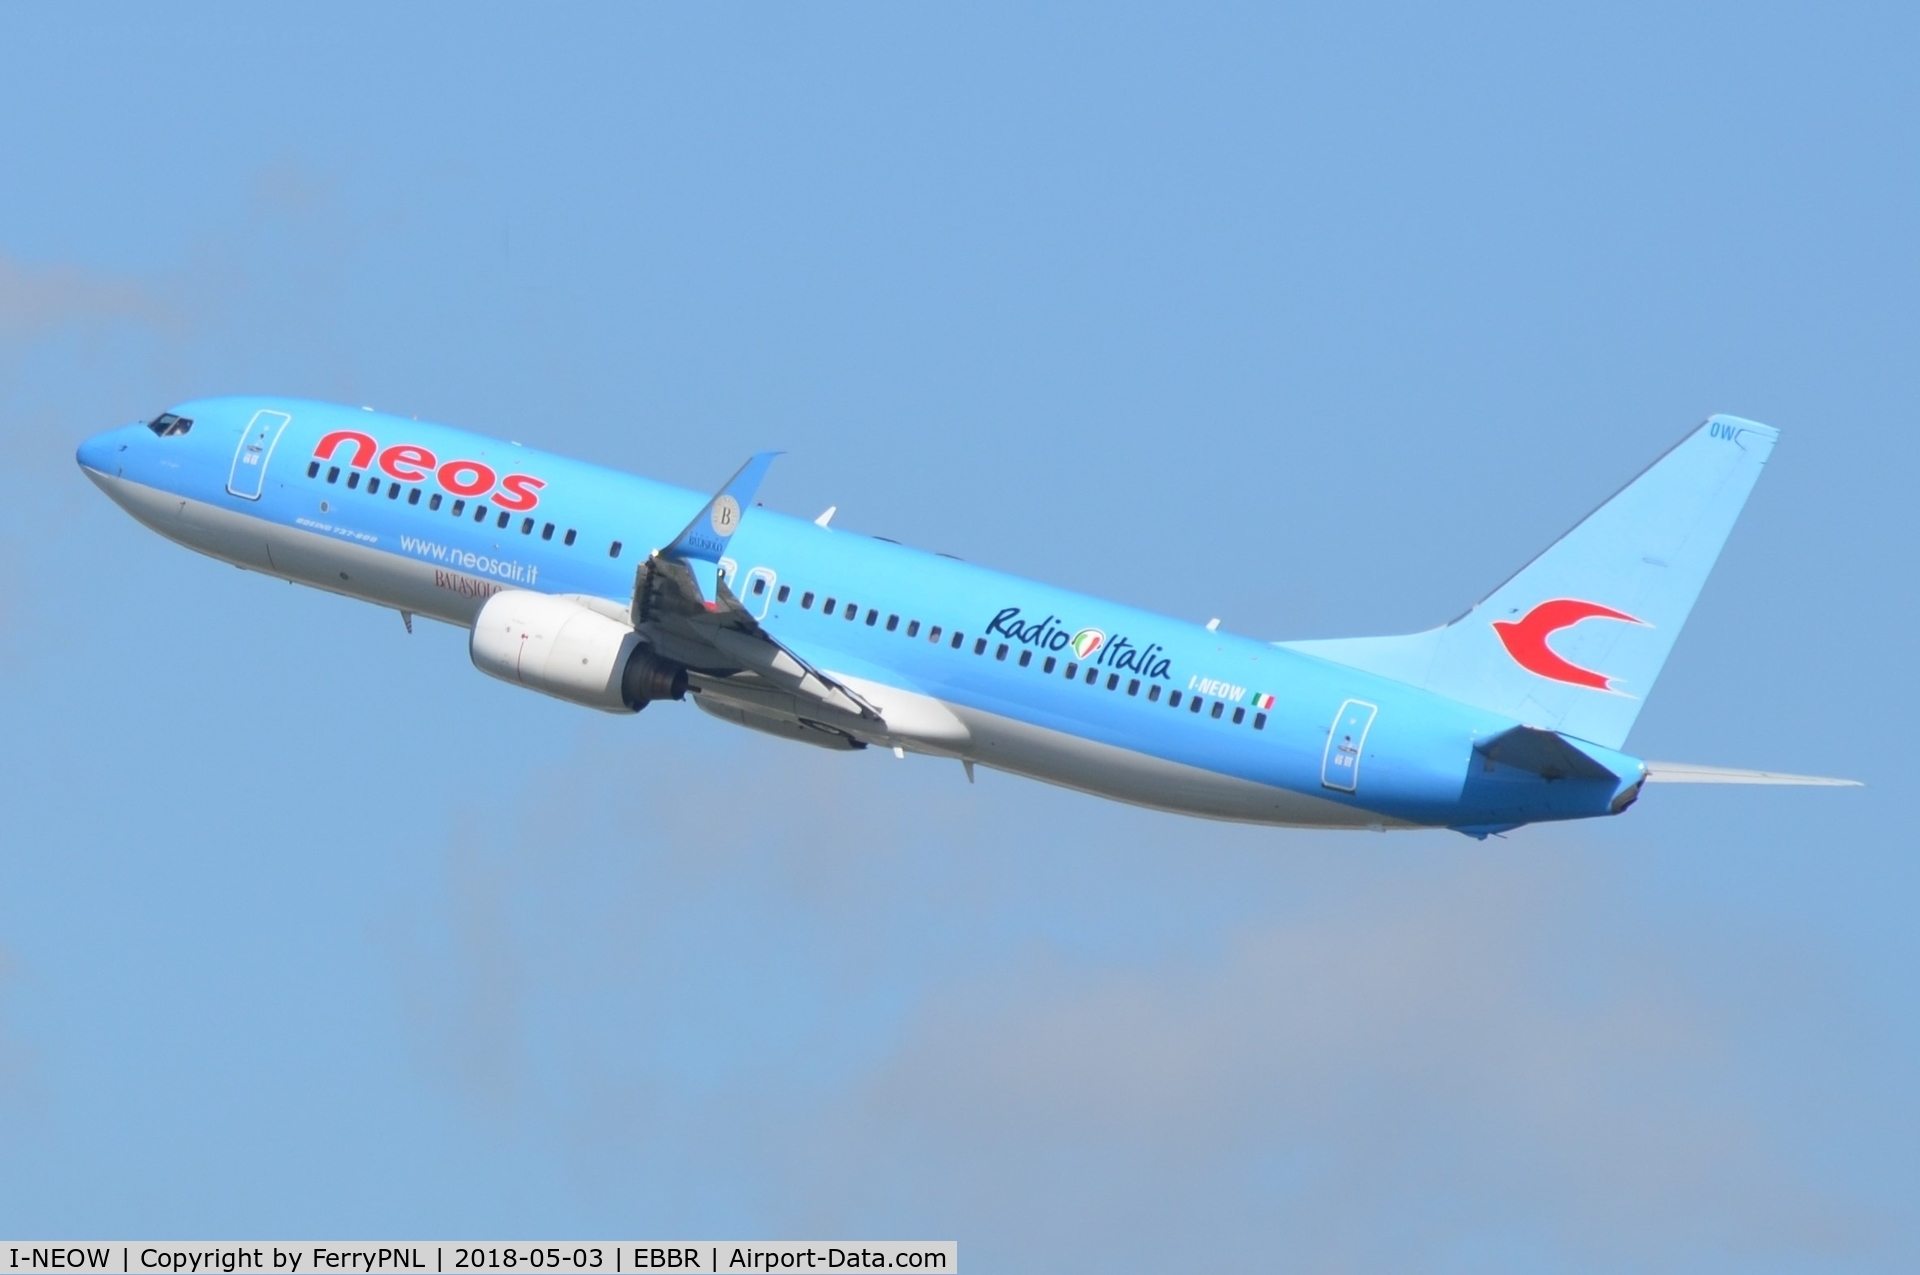 I-NEOW, 2007 Boeing 737-86N C/N 32685, Neos B738 operating a TUI flight out of BRU